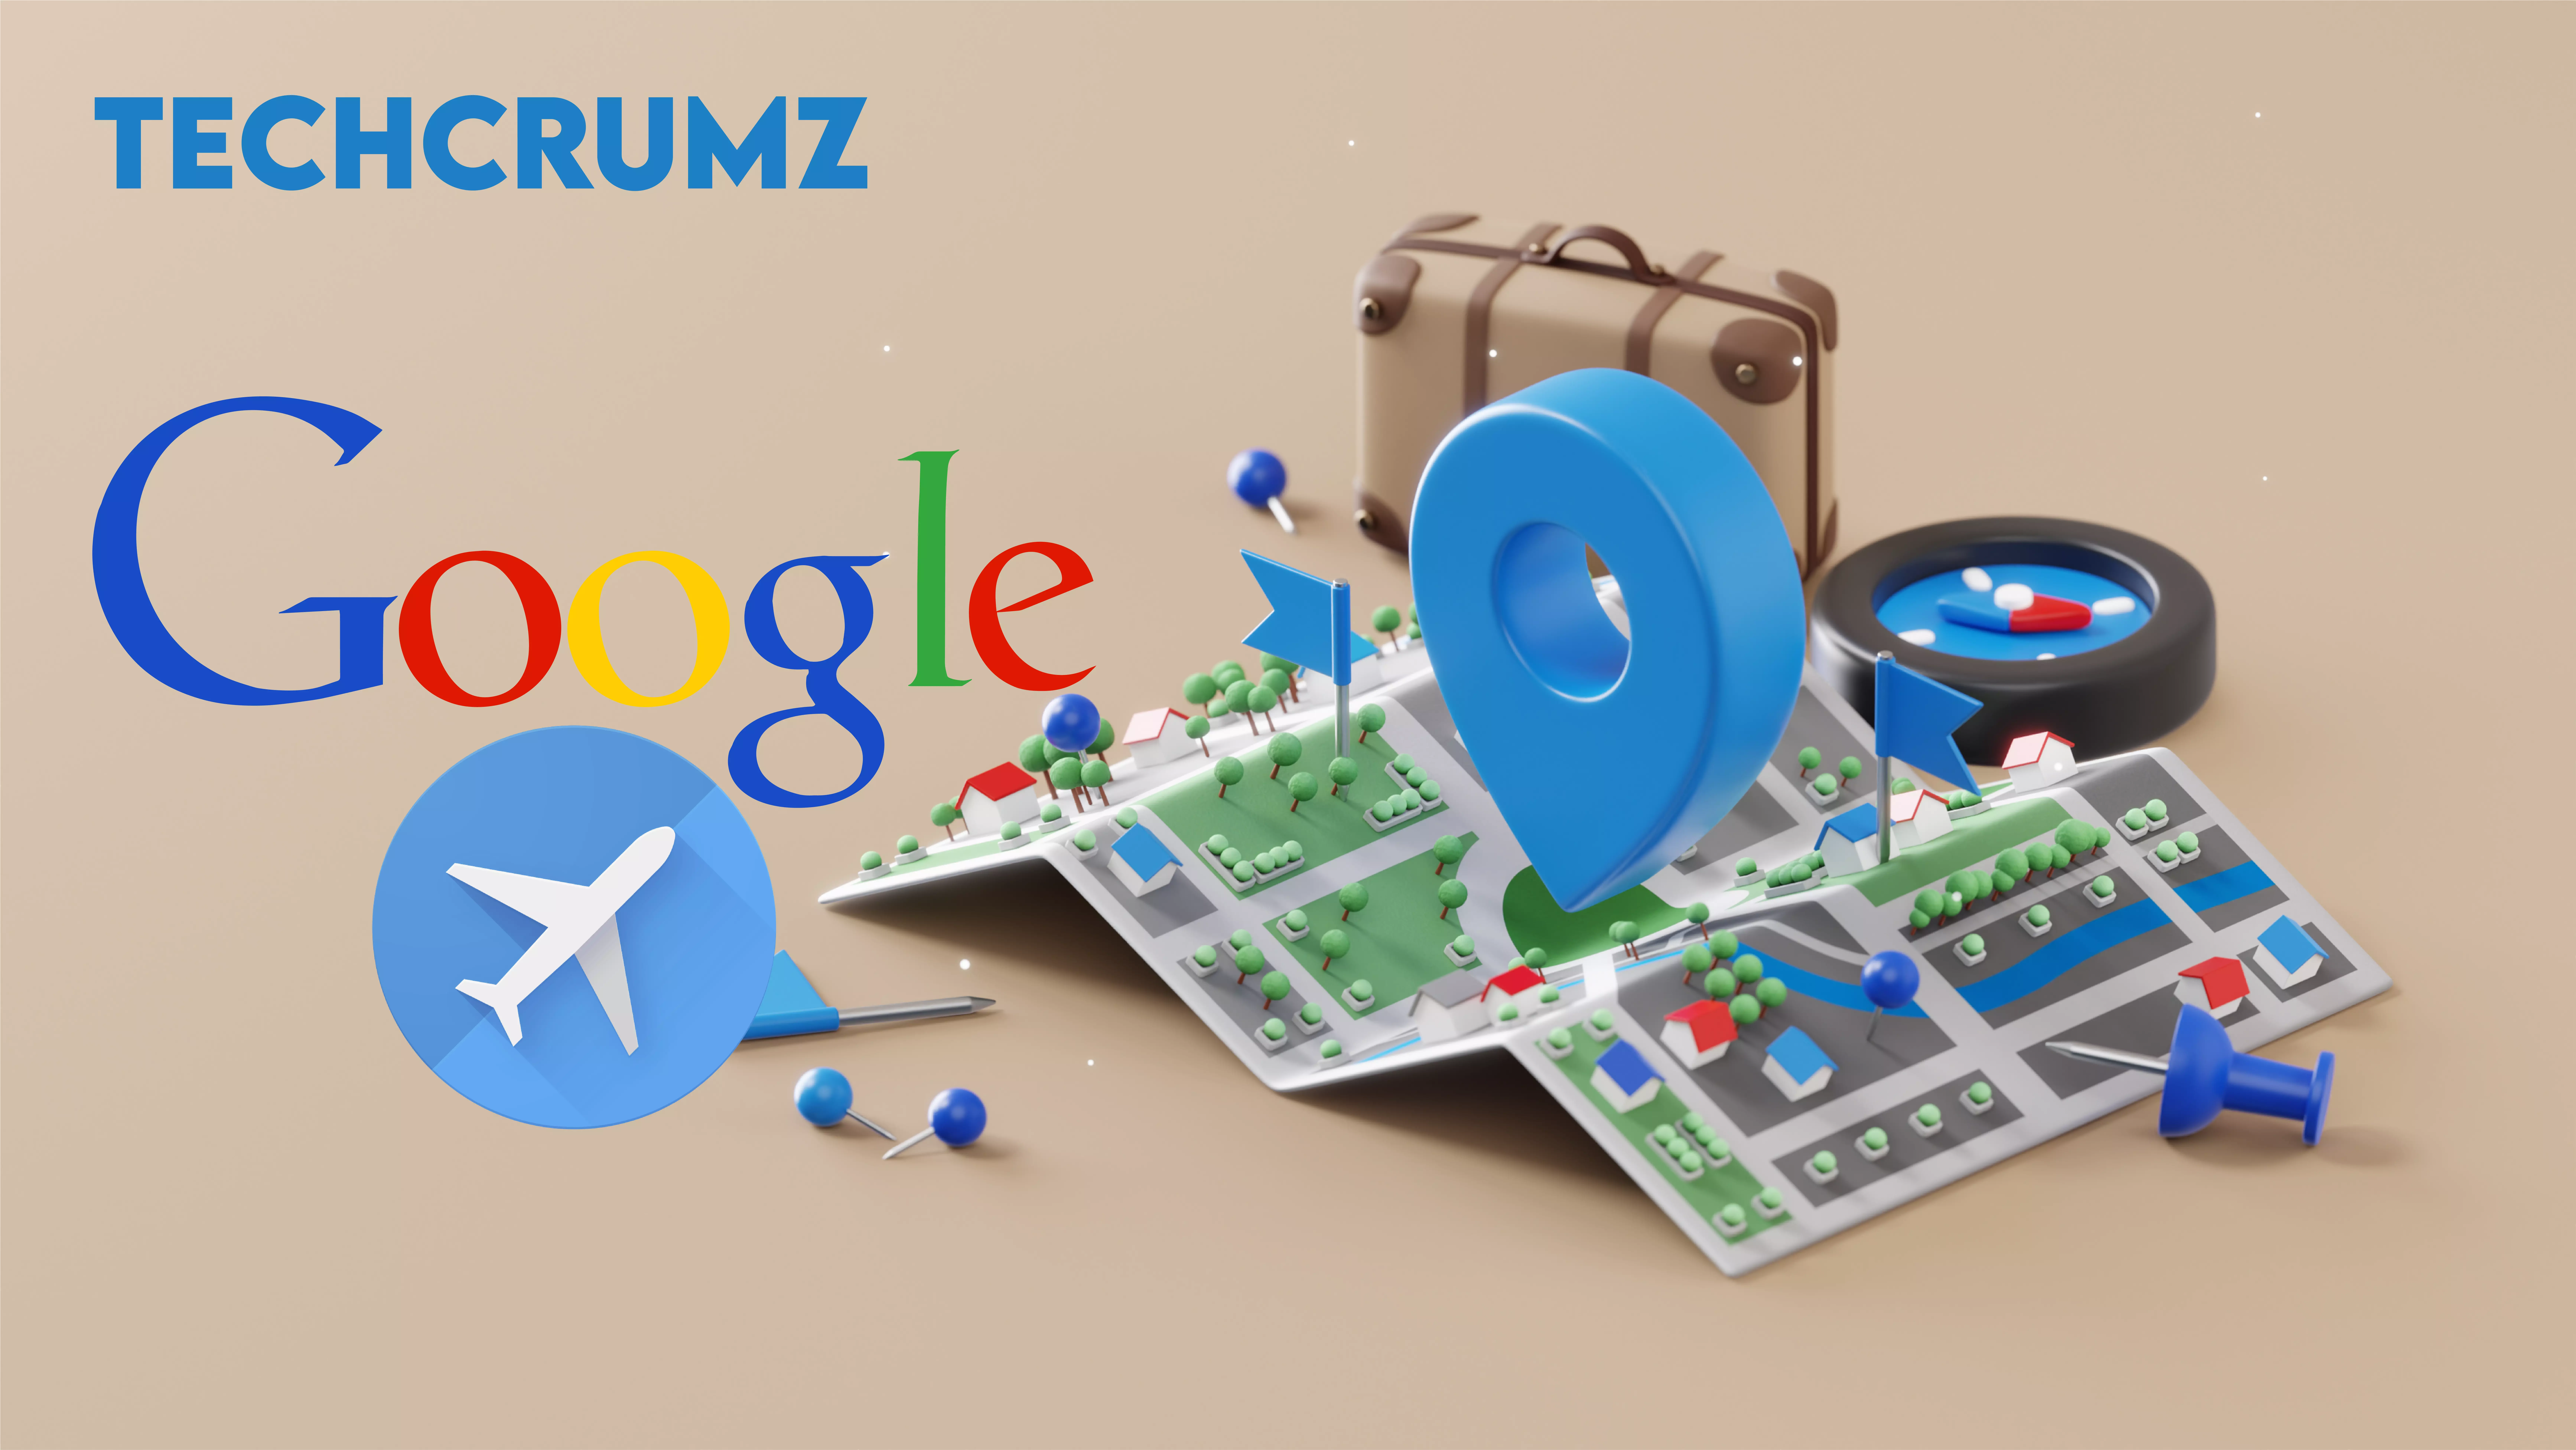 Google announced this Tuesday that it will no longer charge for displaying hotel booking links on Google Travel.